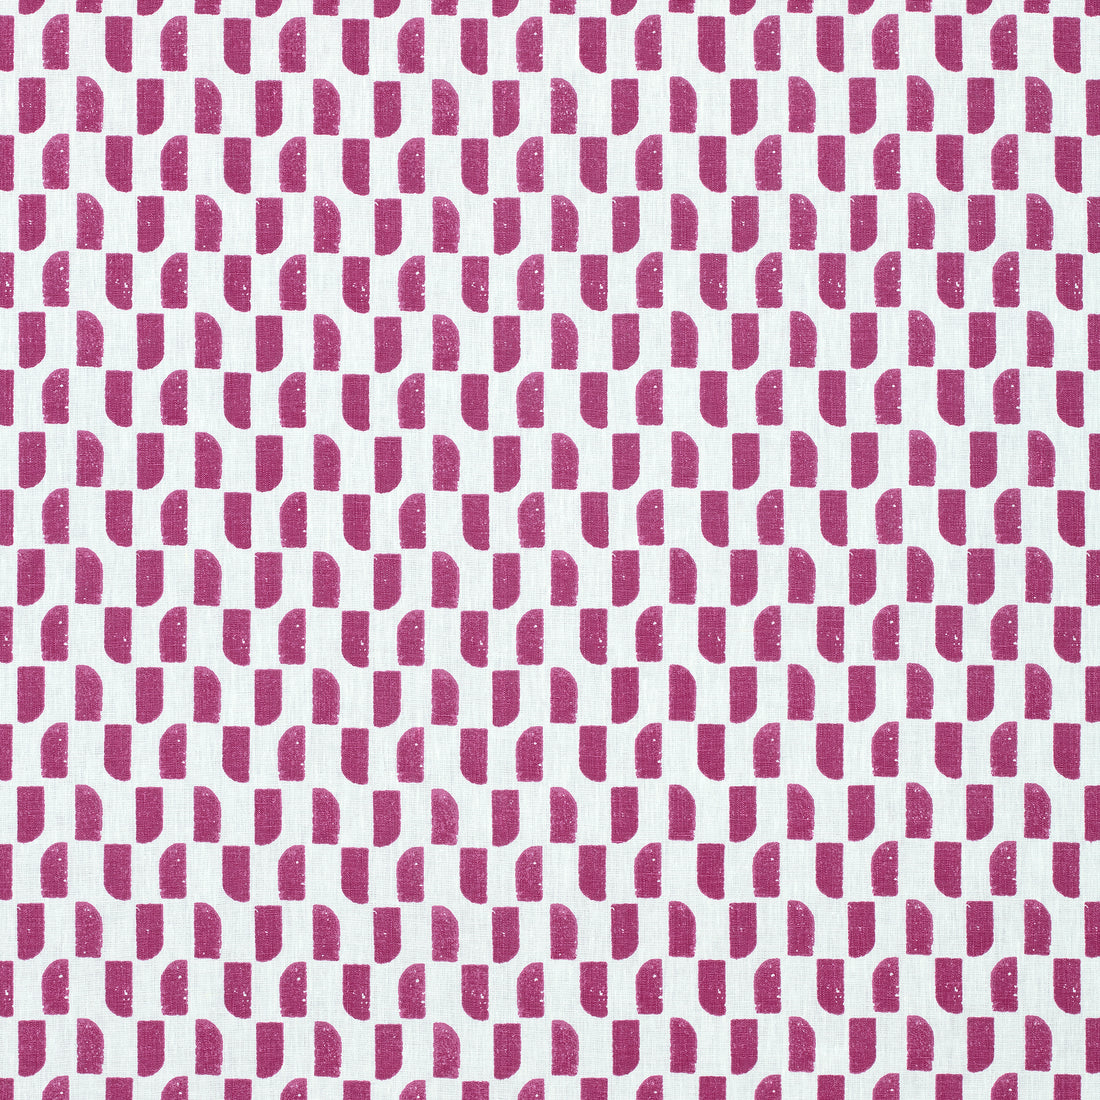 Akio fabric in fuchsia color - pattern number AF9813 - by Anna French in the Nara collection